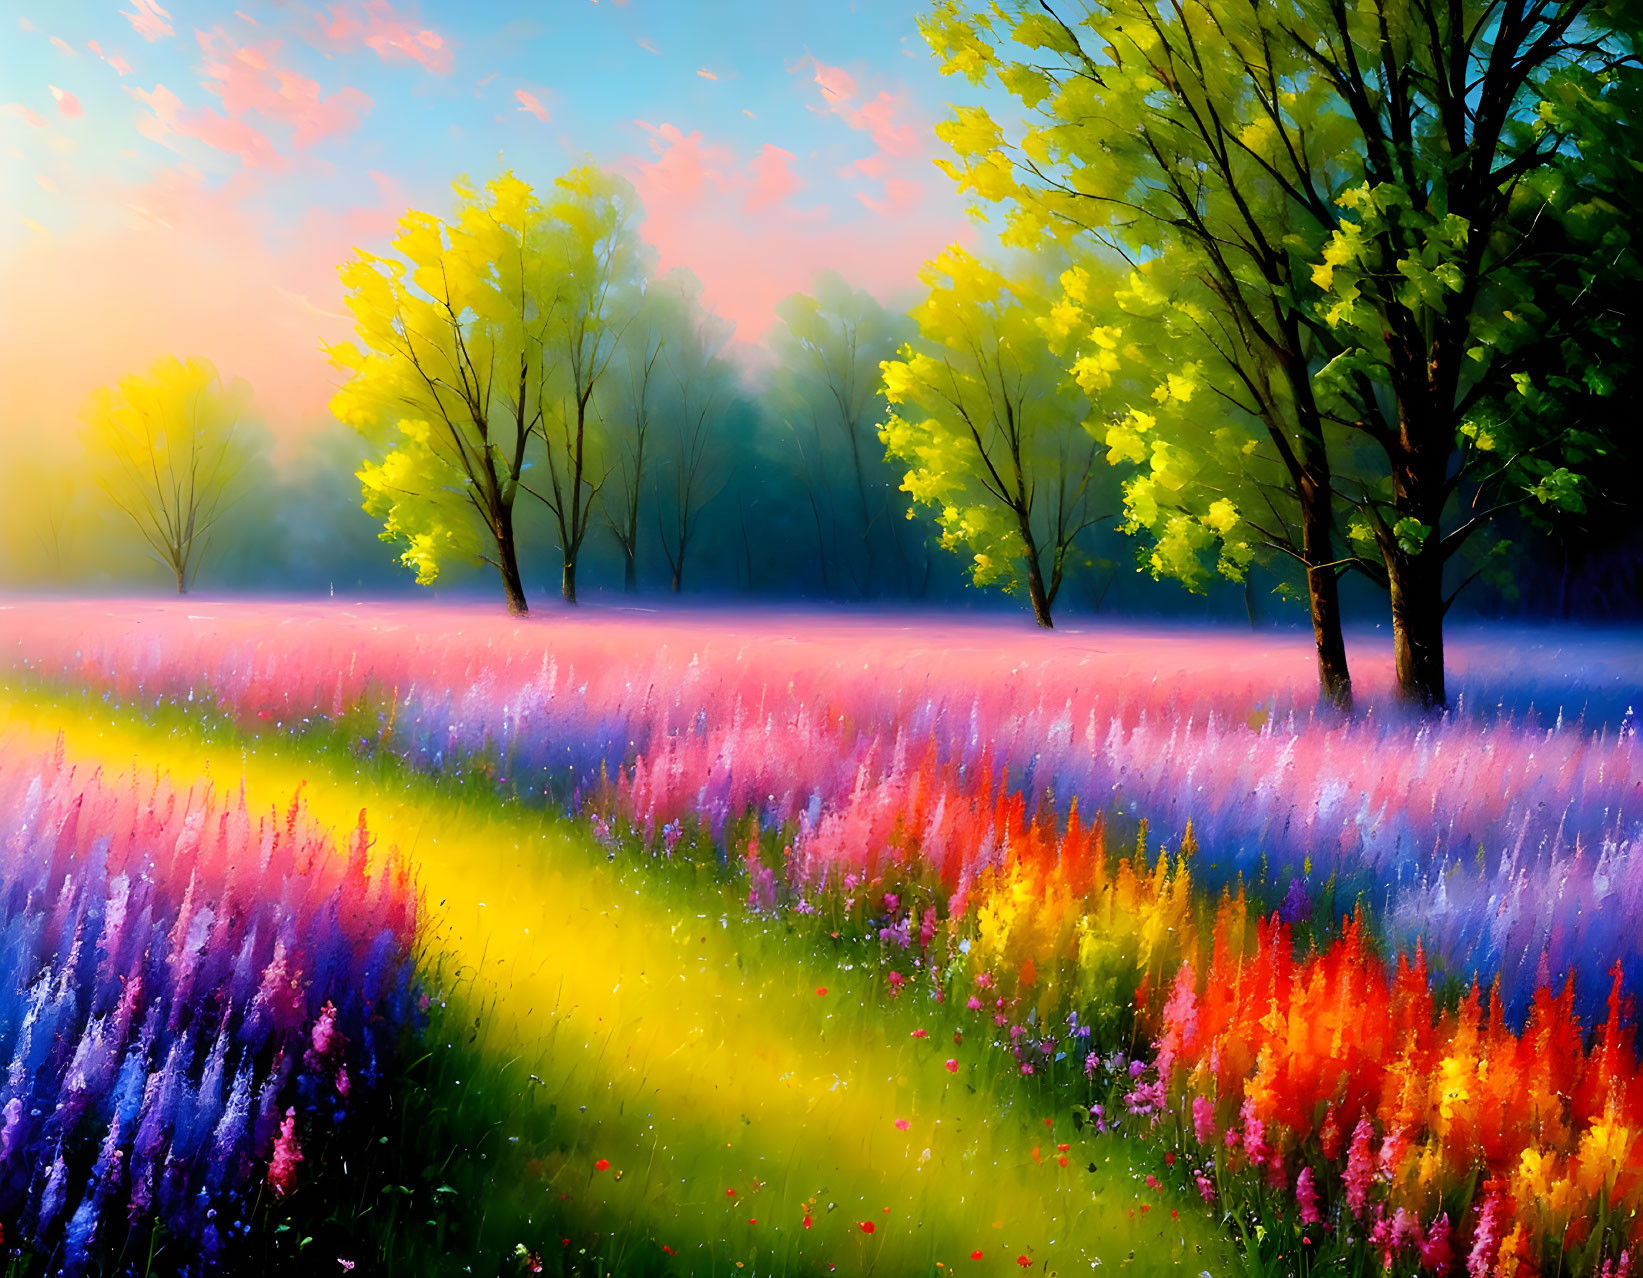 Colorful Landscape Painting: Field of Flowers and Trees